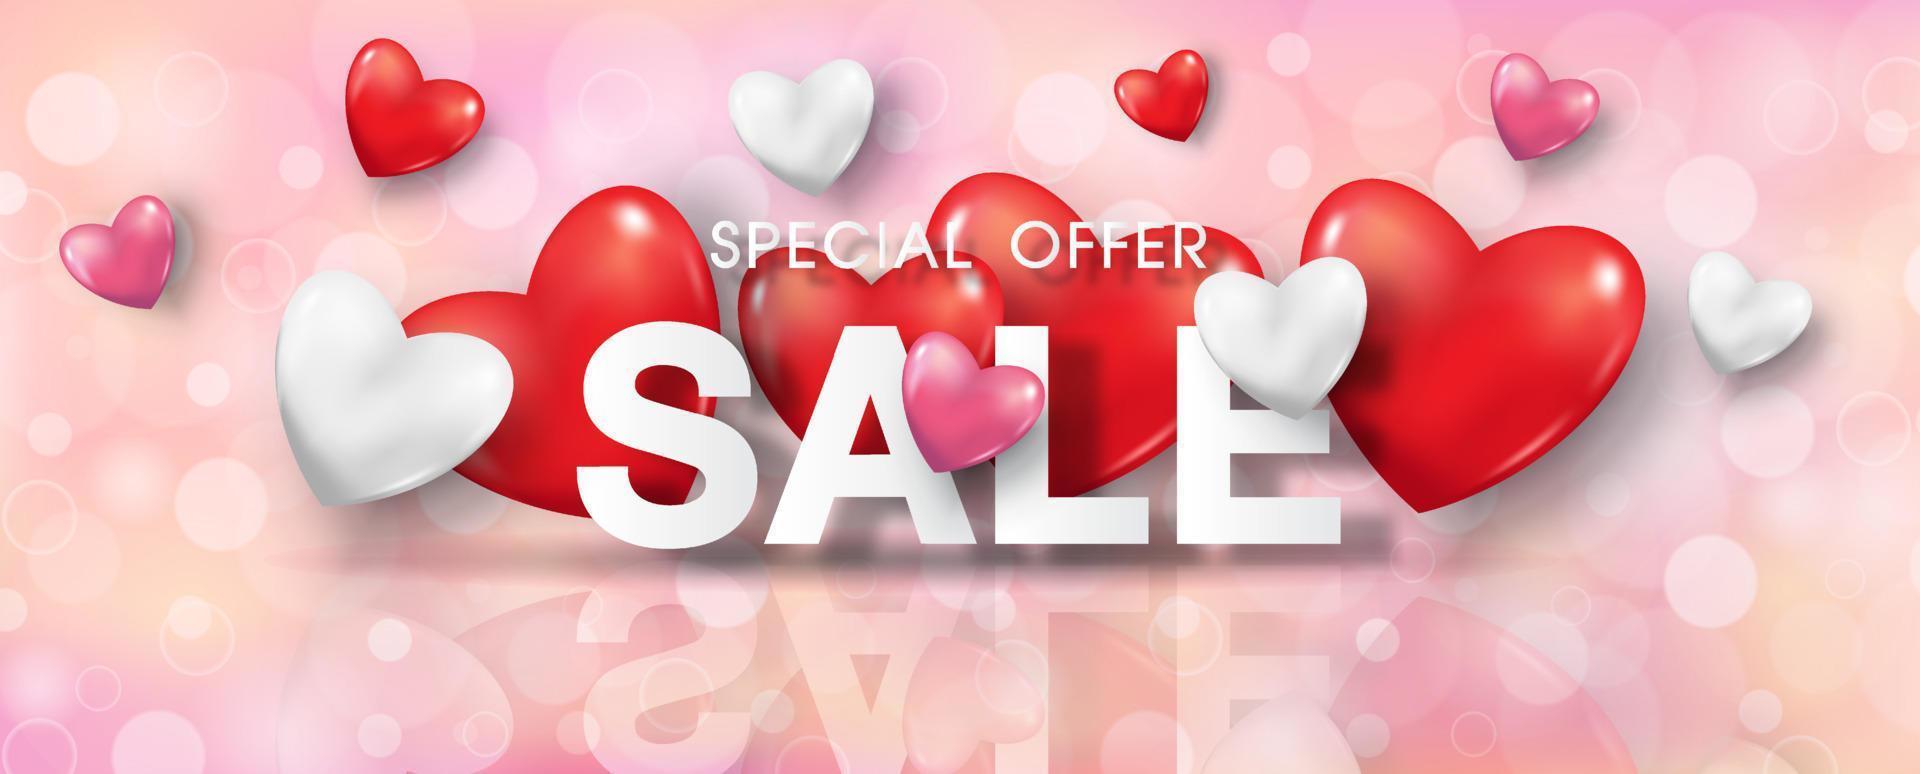 Valentine day's specials offer with sale wording and harts on pink bokeh pattern background. Valentine greeting card in banner vector design.